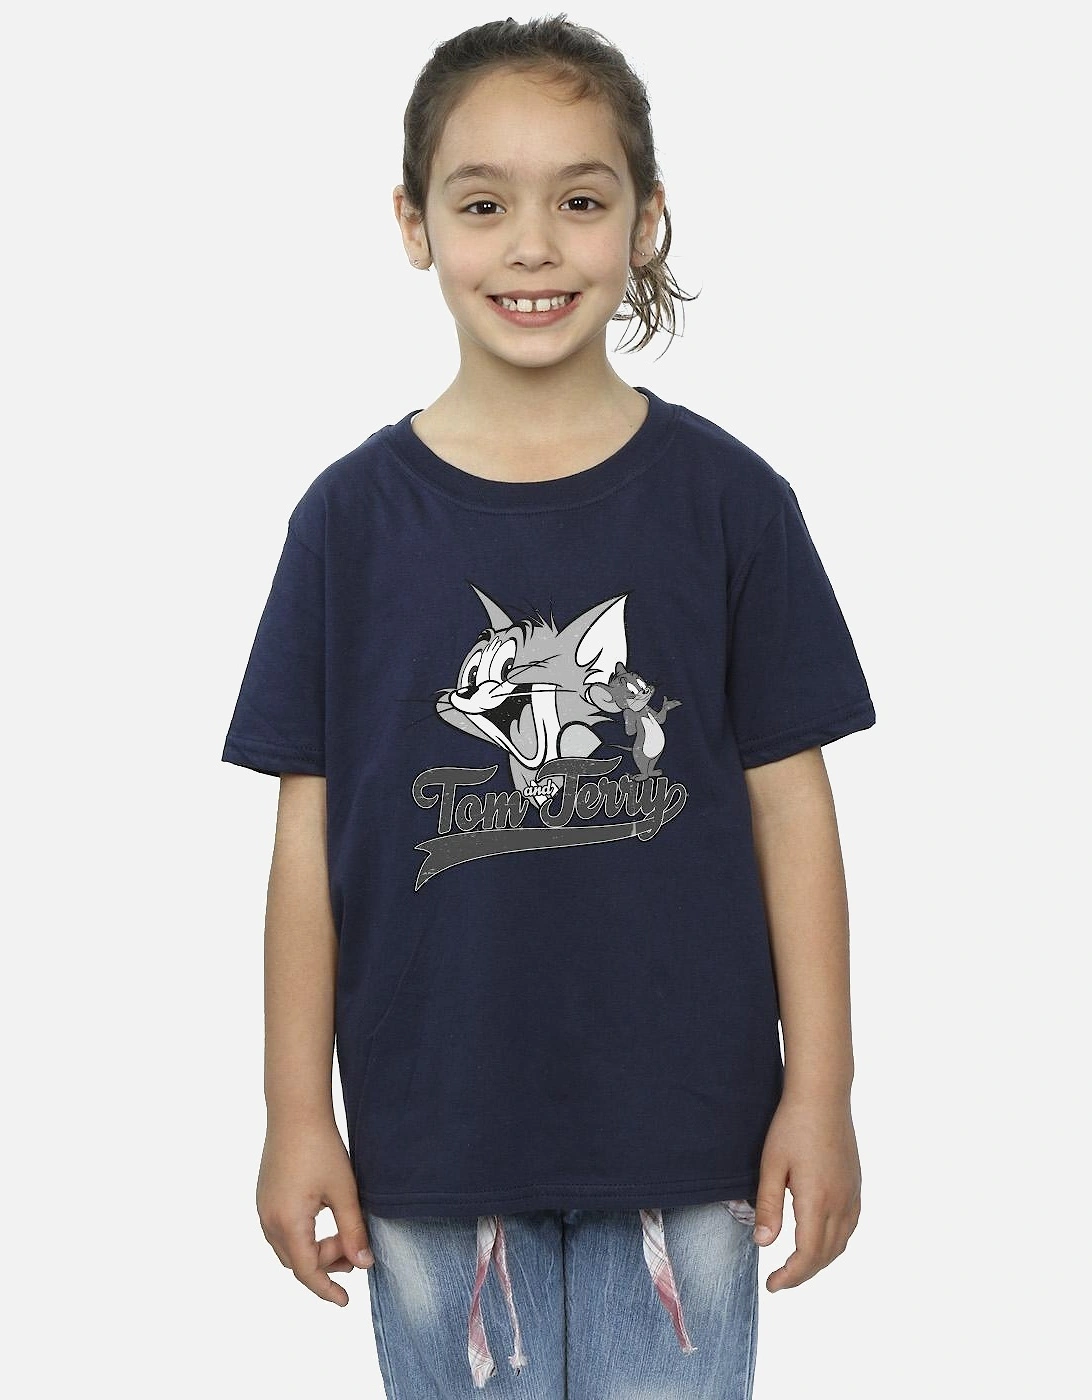 Tom And Jerry Girls Greyscale Square Cotton T-Shirt